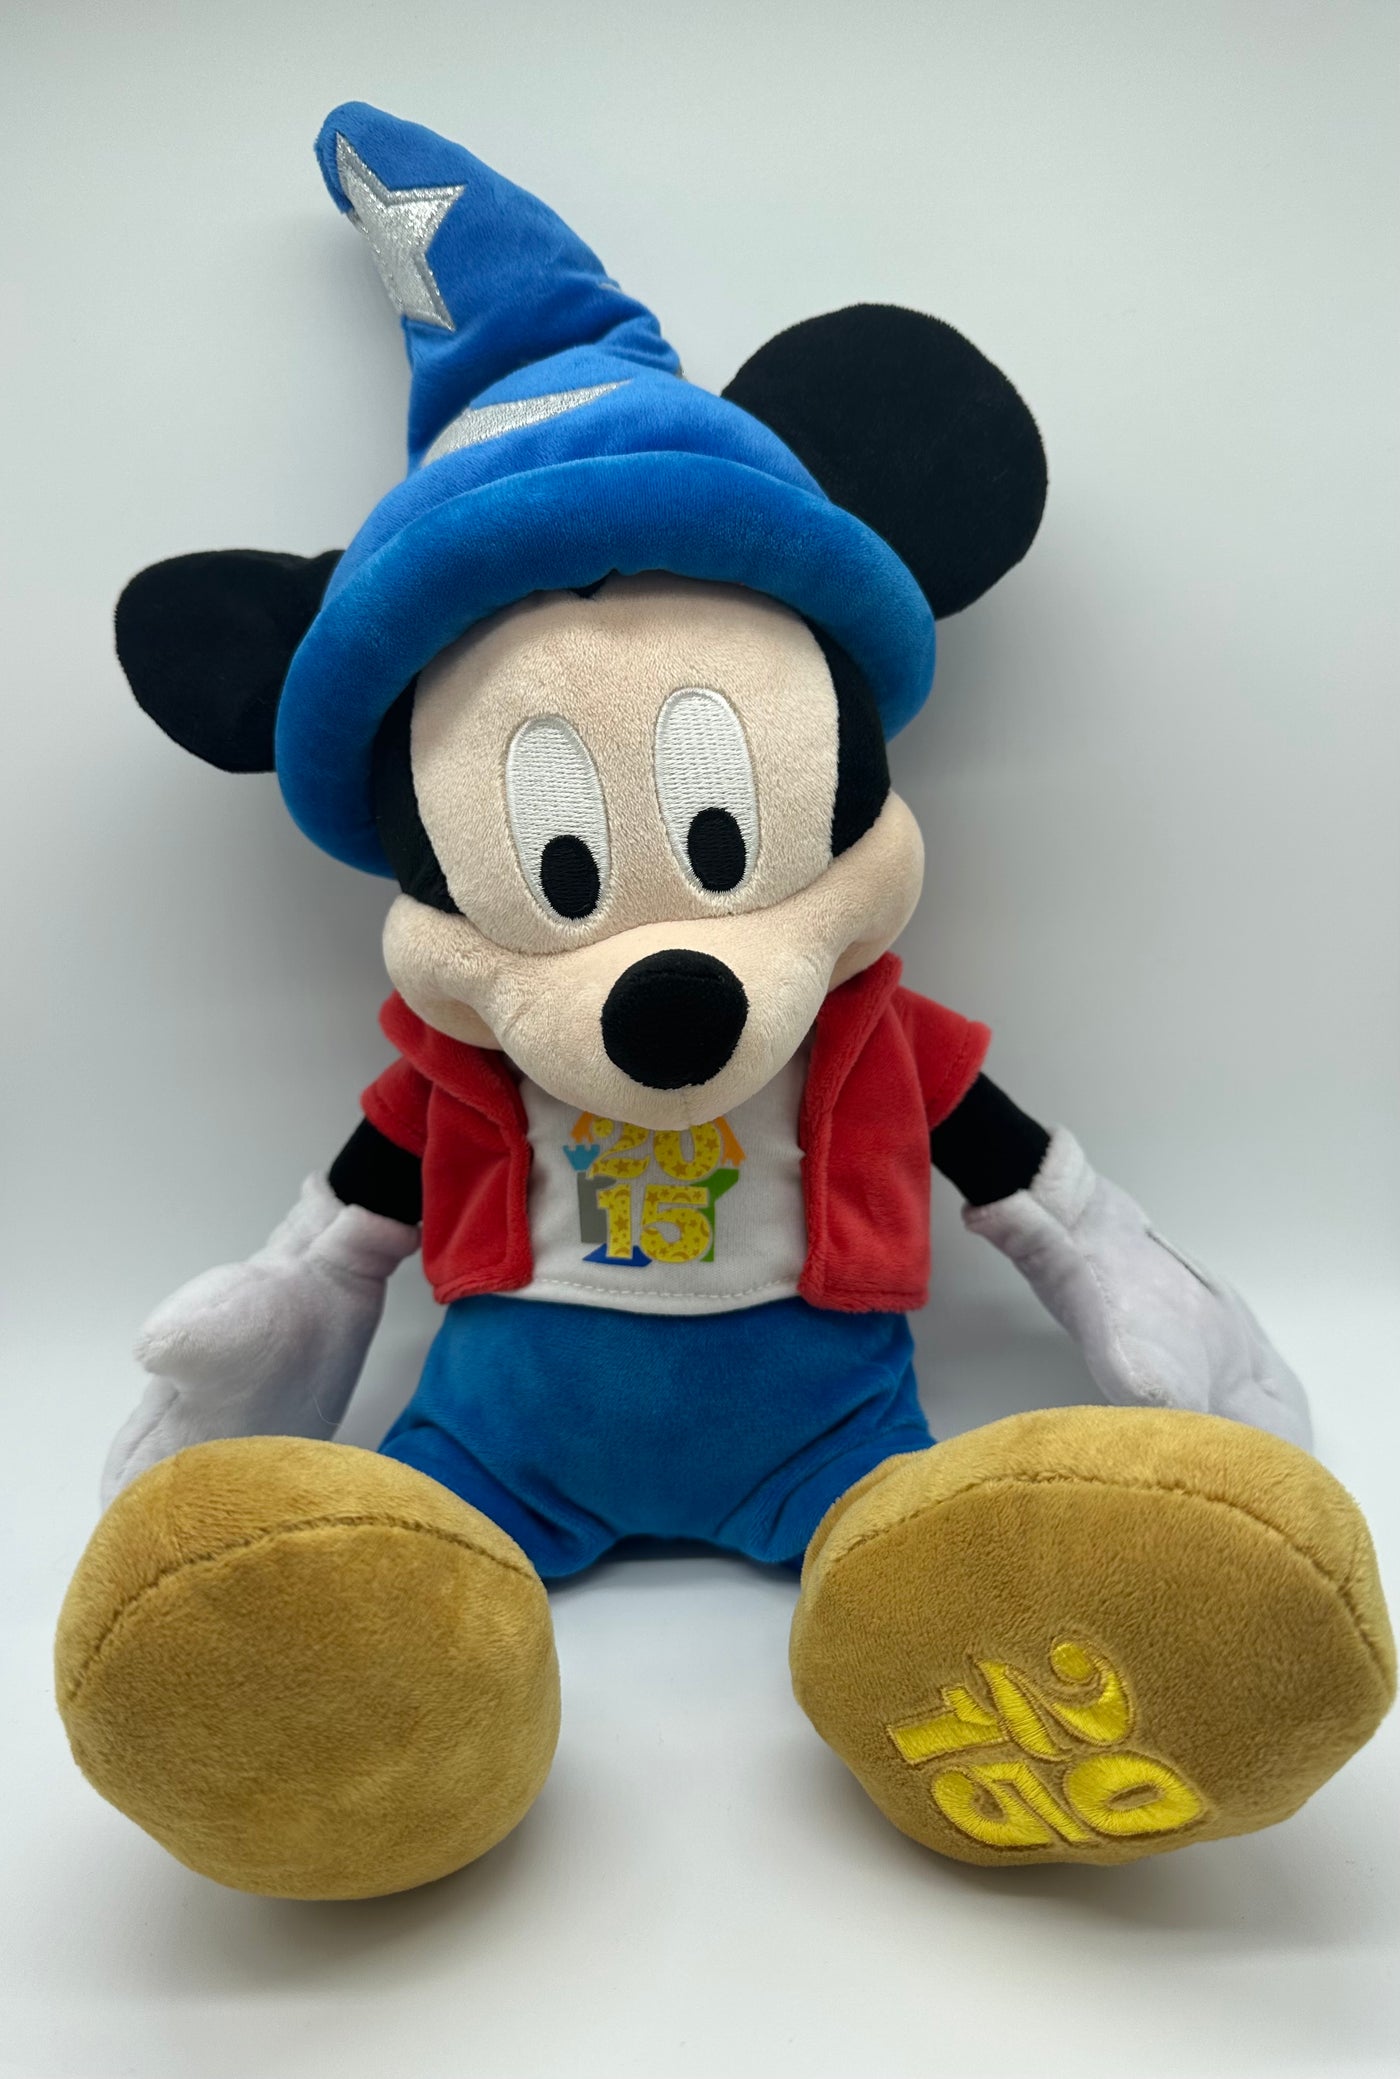 Disney Parks 2015 Sorcerer Mickey Plush New with Tag